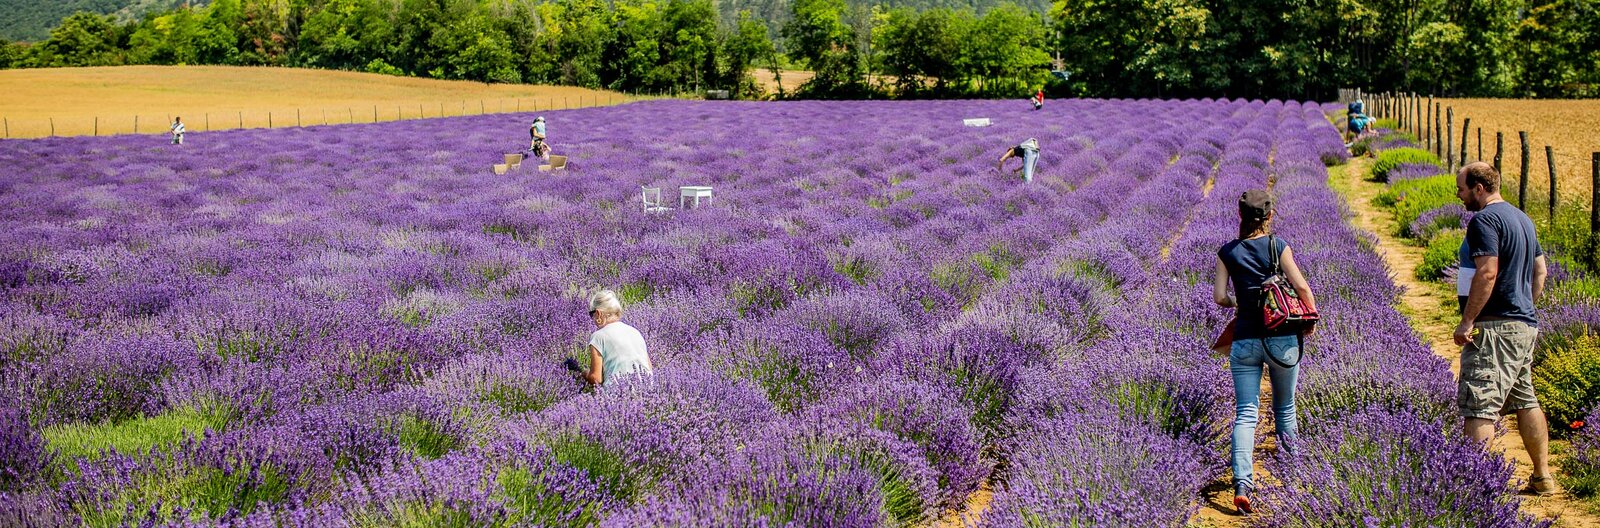 6 best places near Budapest to pick lavender 